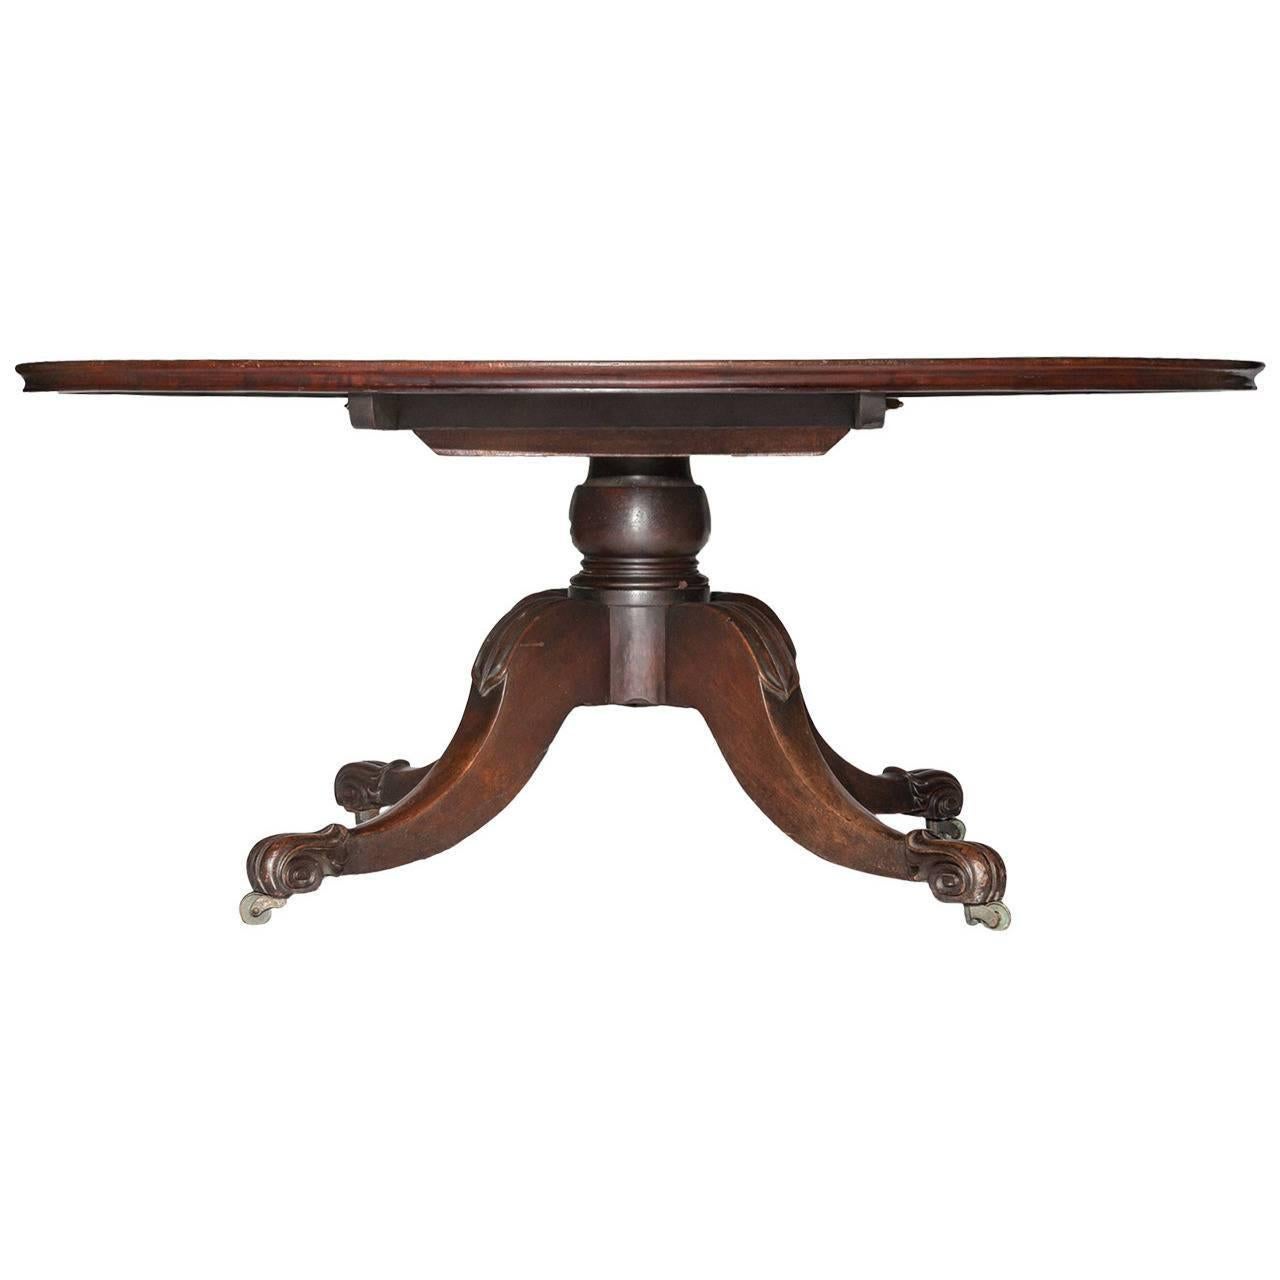 Six Foot Circular Mahogany Dining Table by Mack, Williams, and Gibton. The circular top raised on a large turned and clasped column and four large down-swept and acanthus-carved cabriole legs with brass casters.